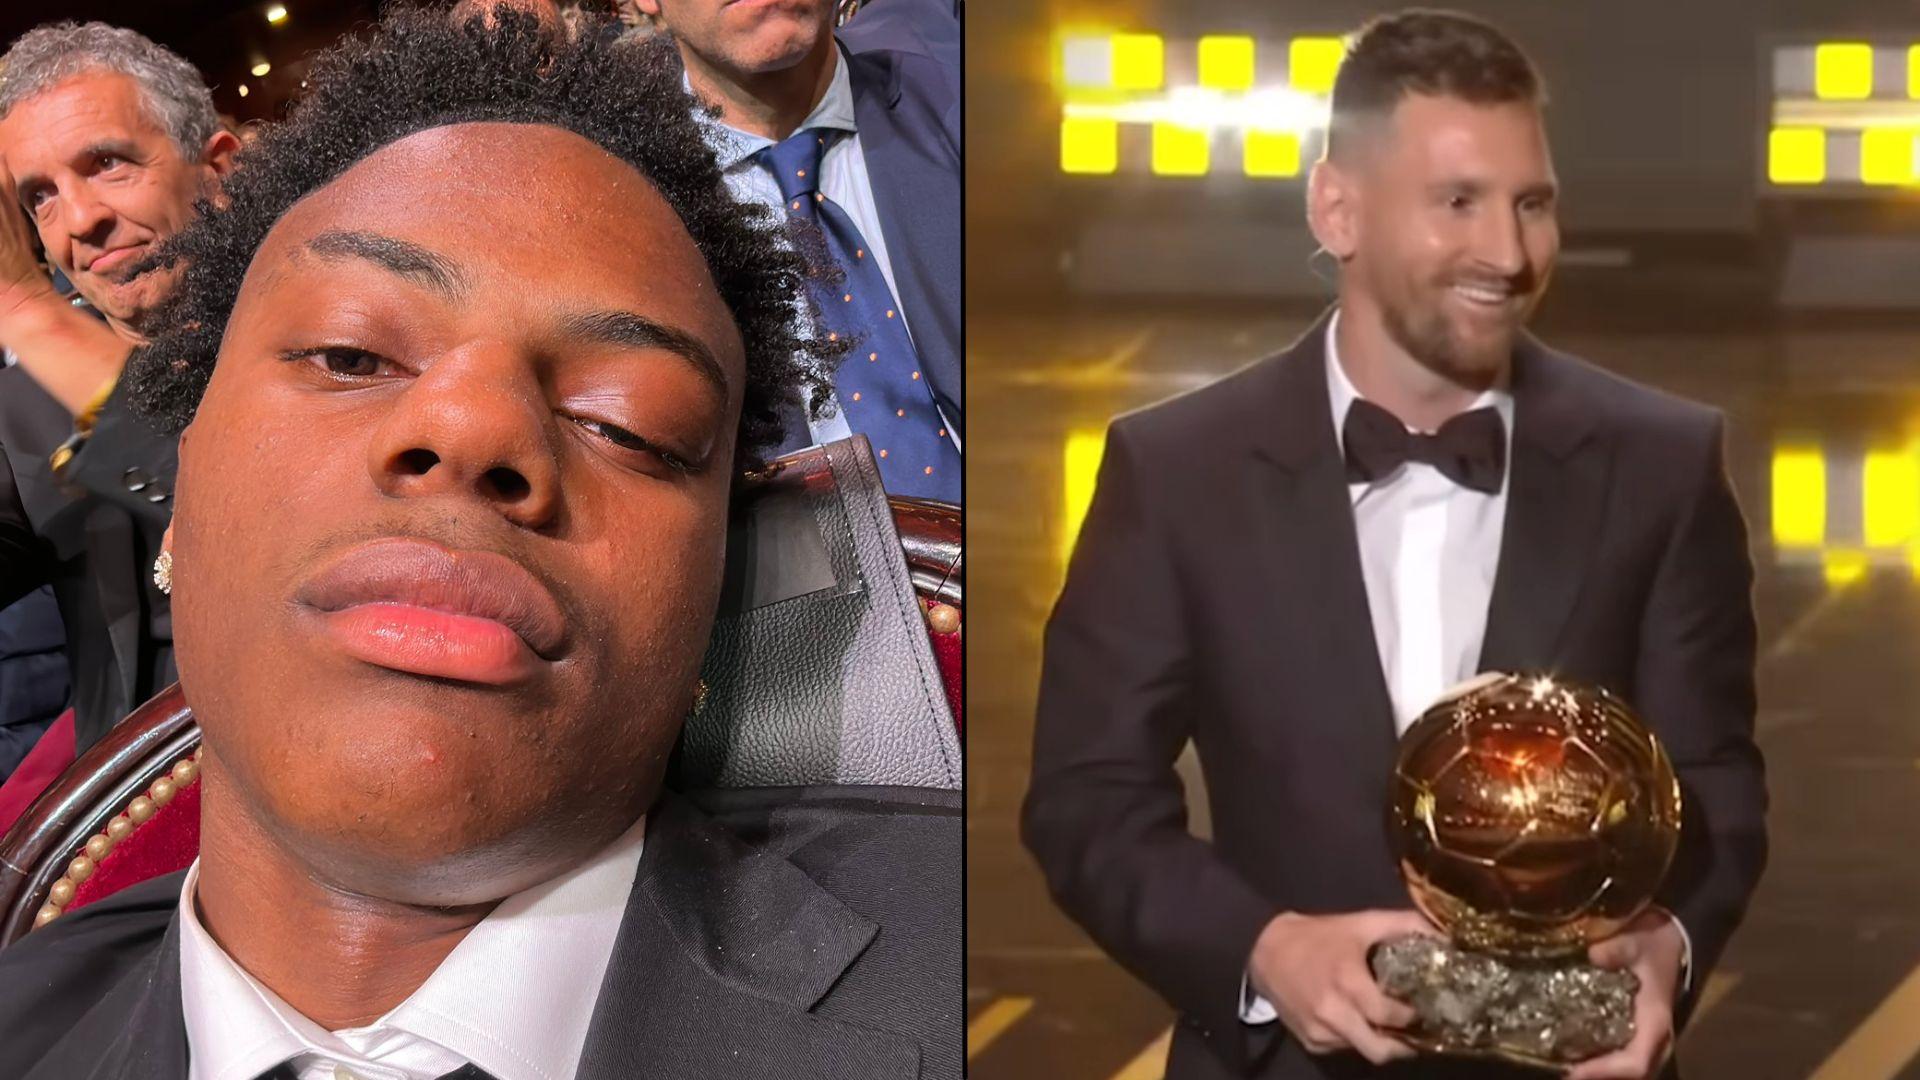 IShowSpeed slumped in seat looking sad with Lionel Messi holding Balon d'Or trophy